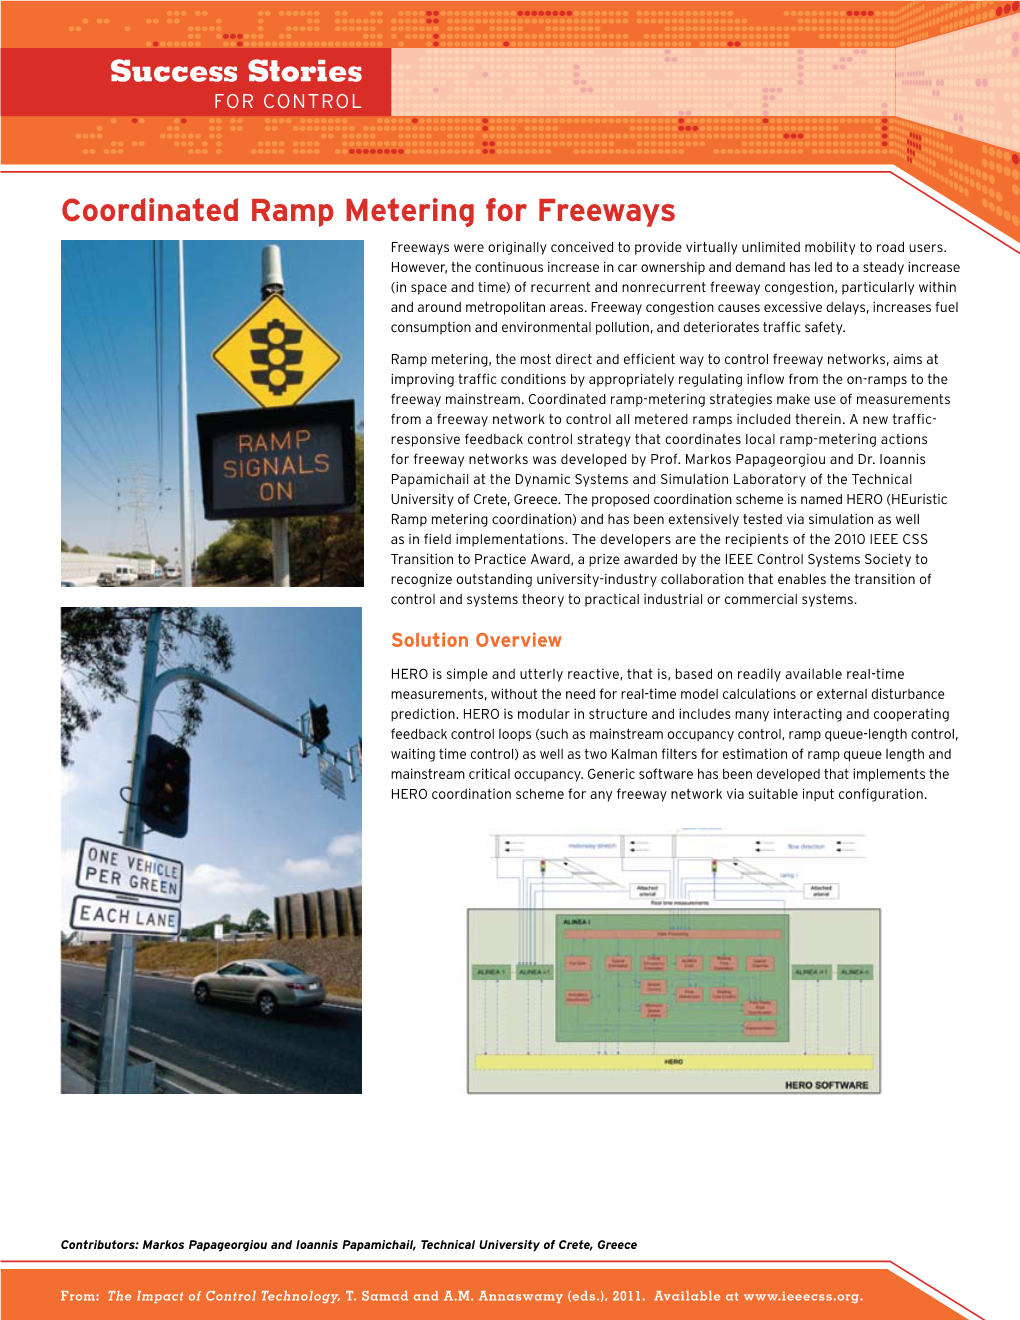 Coordinated Ramp Metering for Freeways Freeways Were Originally Conceived to Provide Virtually Unlimited Mobility to Road Users